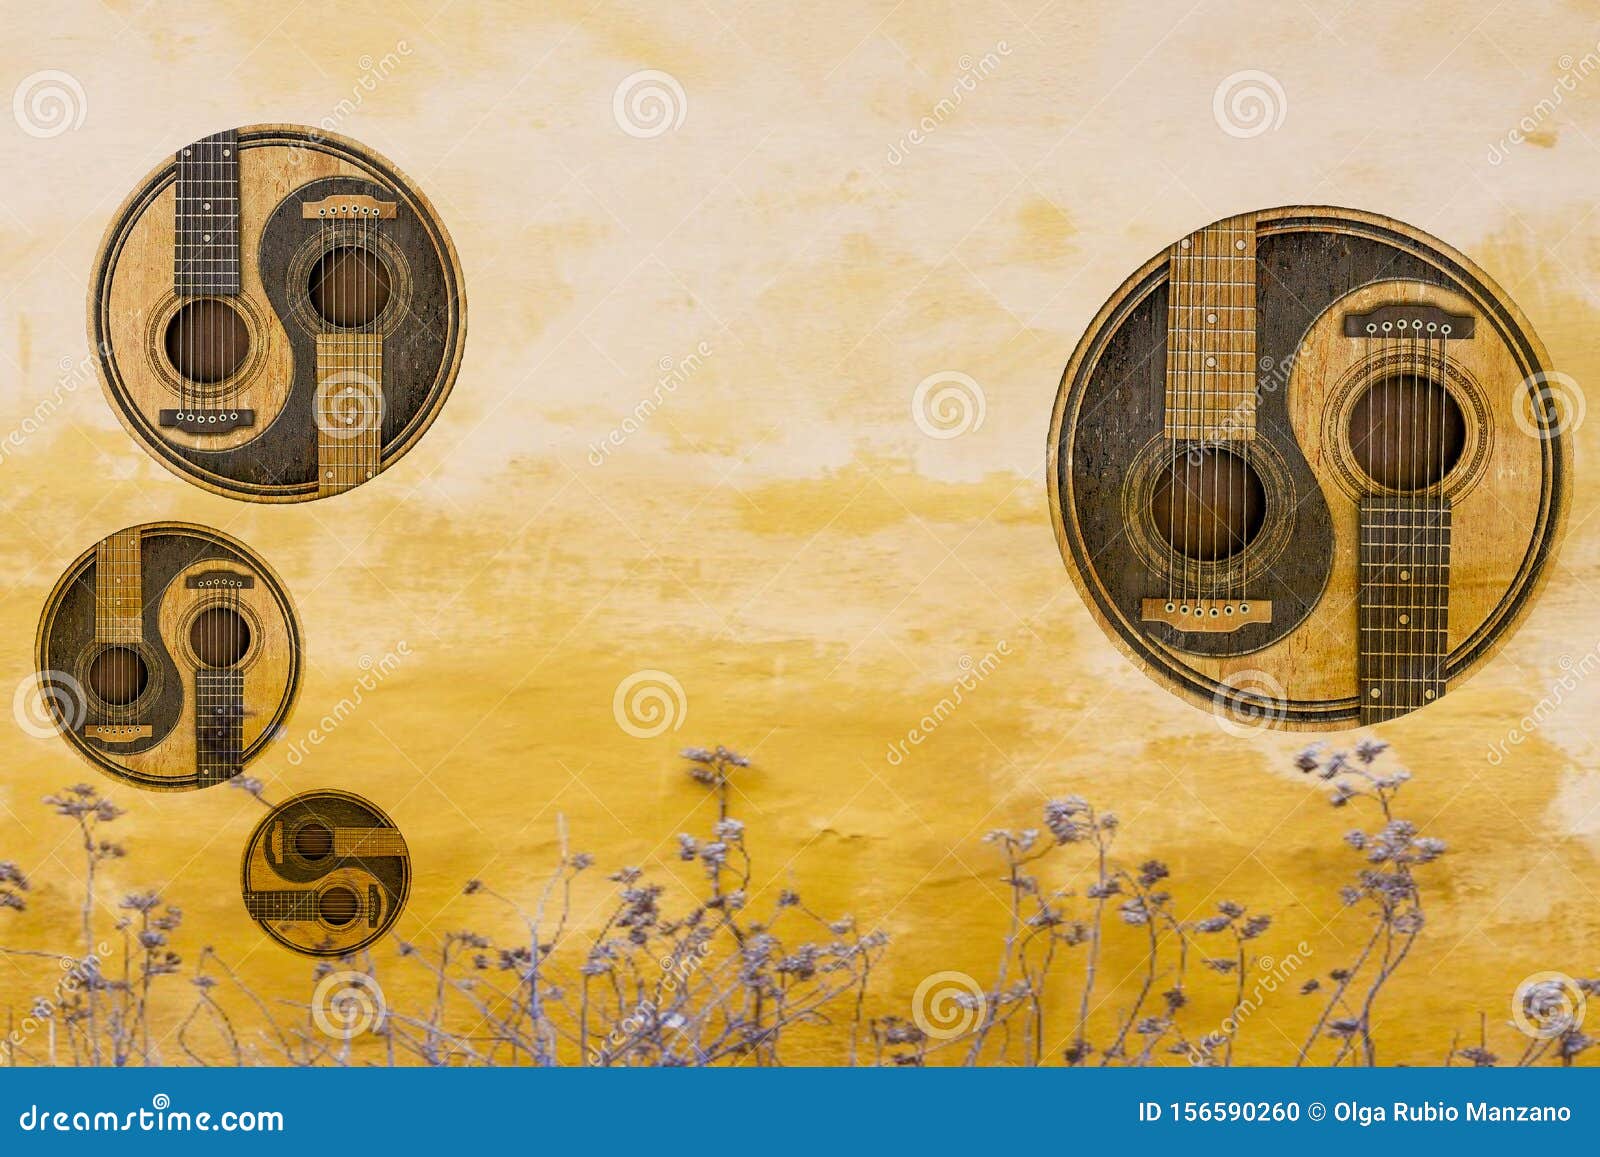 Home Decor with Yin-yang Symbol Handmade in Wooden Stock Photo - Image